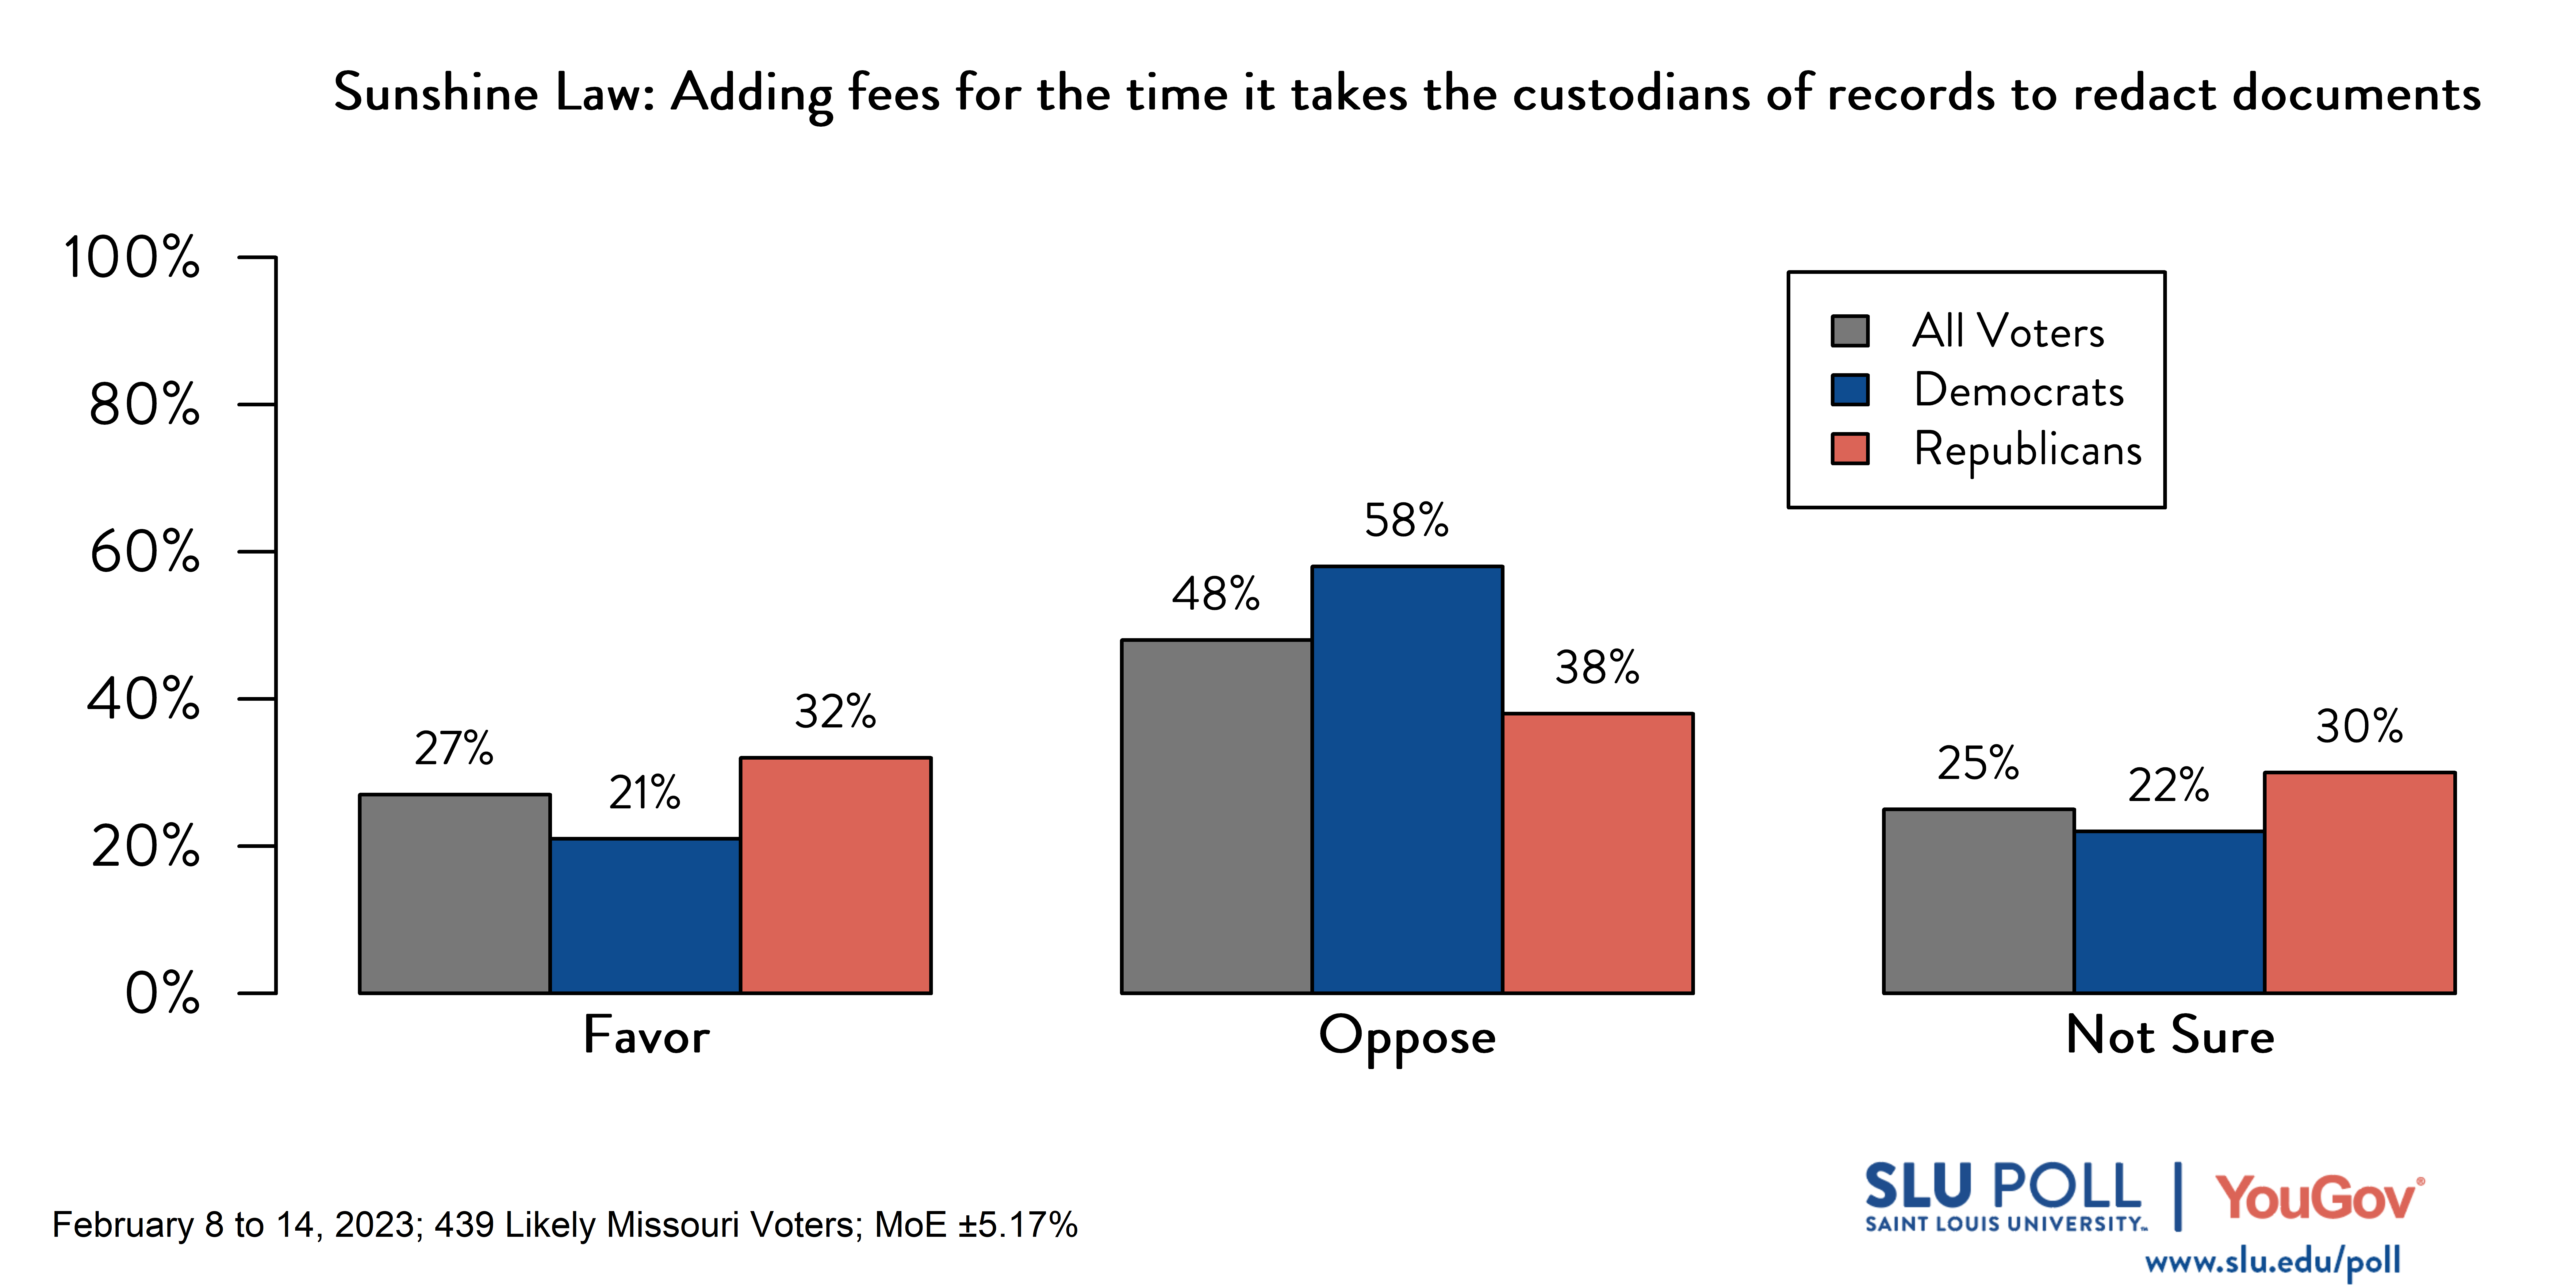 Likely voters' responses to 'Missouri's Sunshine Act allows the public to make requests for government documents (e.g., meeting records or public officials' communications). Do you favor or oppose the following changes to Sunshine Act: Adding fees for the time it takes the custodians of records to redact documents?': 27% Favor, 48% Oppose, and 25% Not sure. Democratic voters' responses: ' 21% Favor, 58% Oppose, and 22% Not sure. Republican voters' responses: 32% Favor, 38% Oppose, and 30% Not sure.